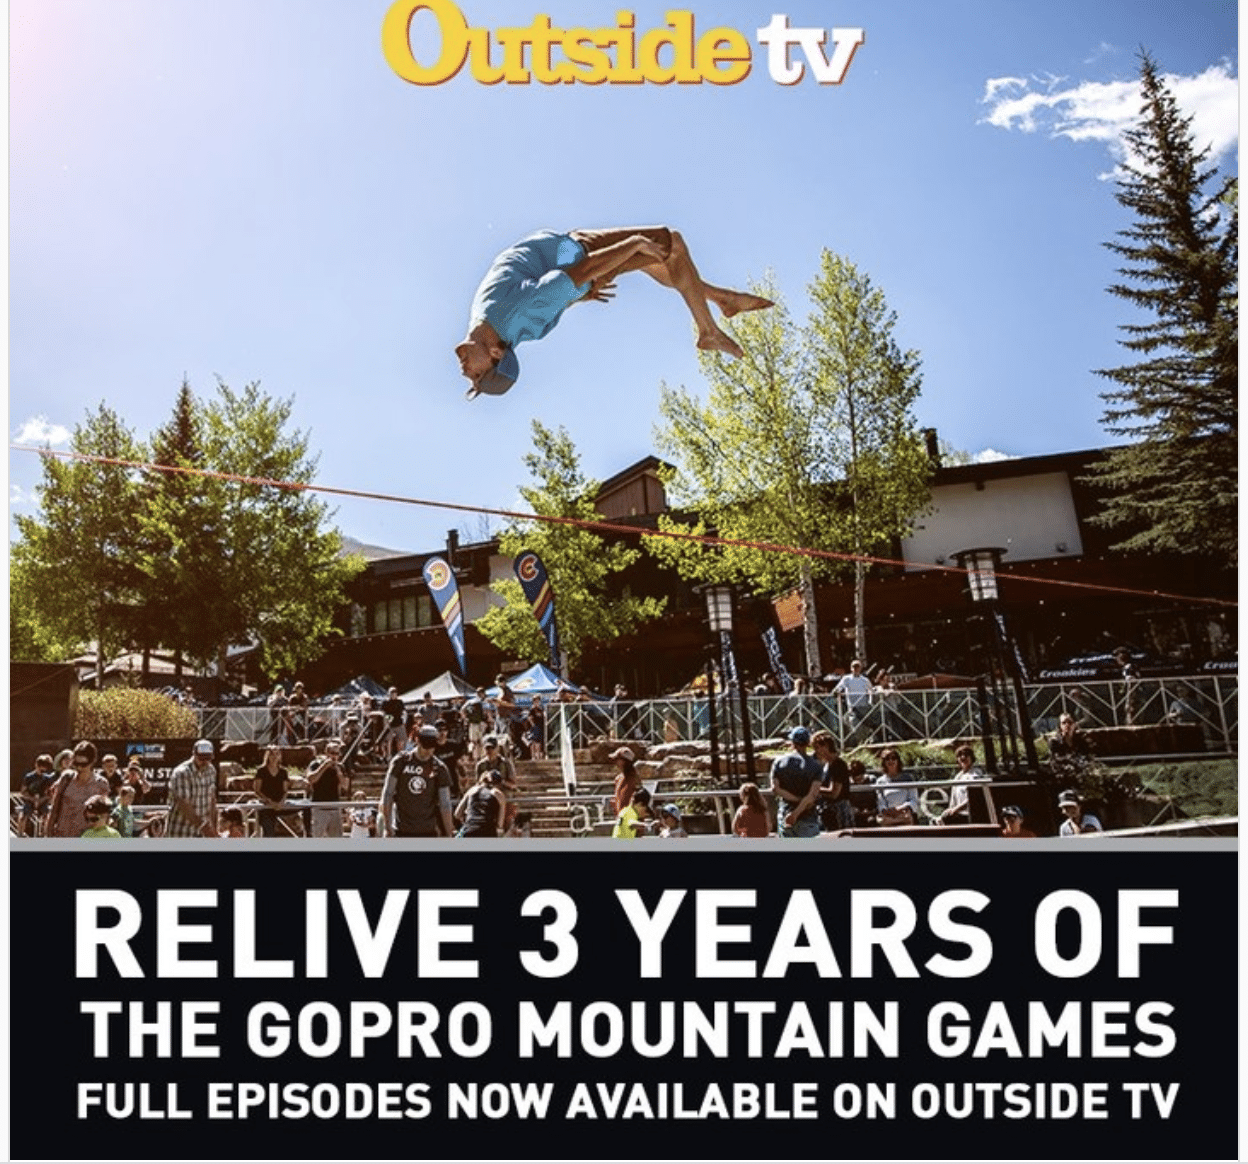 Virtual Vail events: 3 years of the GoPro Mountain Games, stay connected.